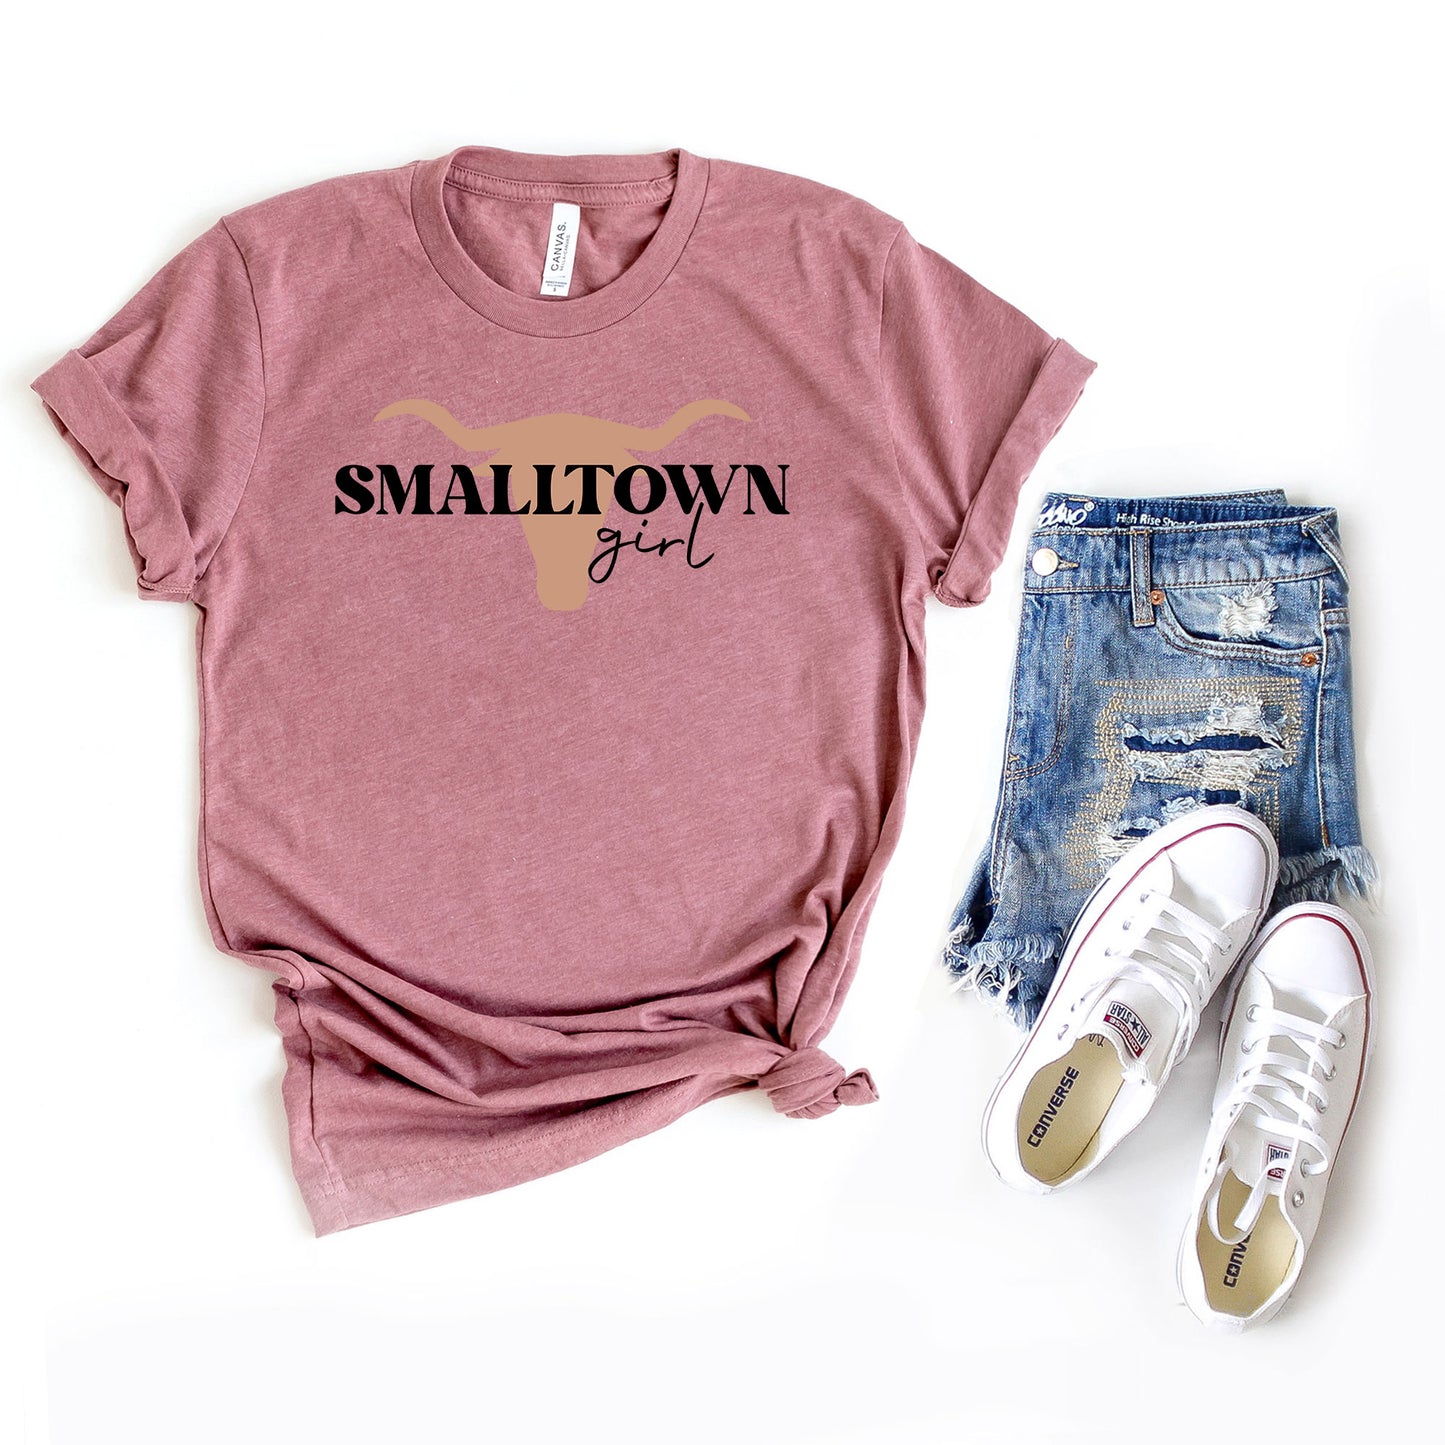 Small Town Girl Bull | Short Sleeve Graphic Tee